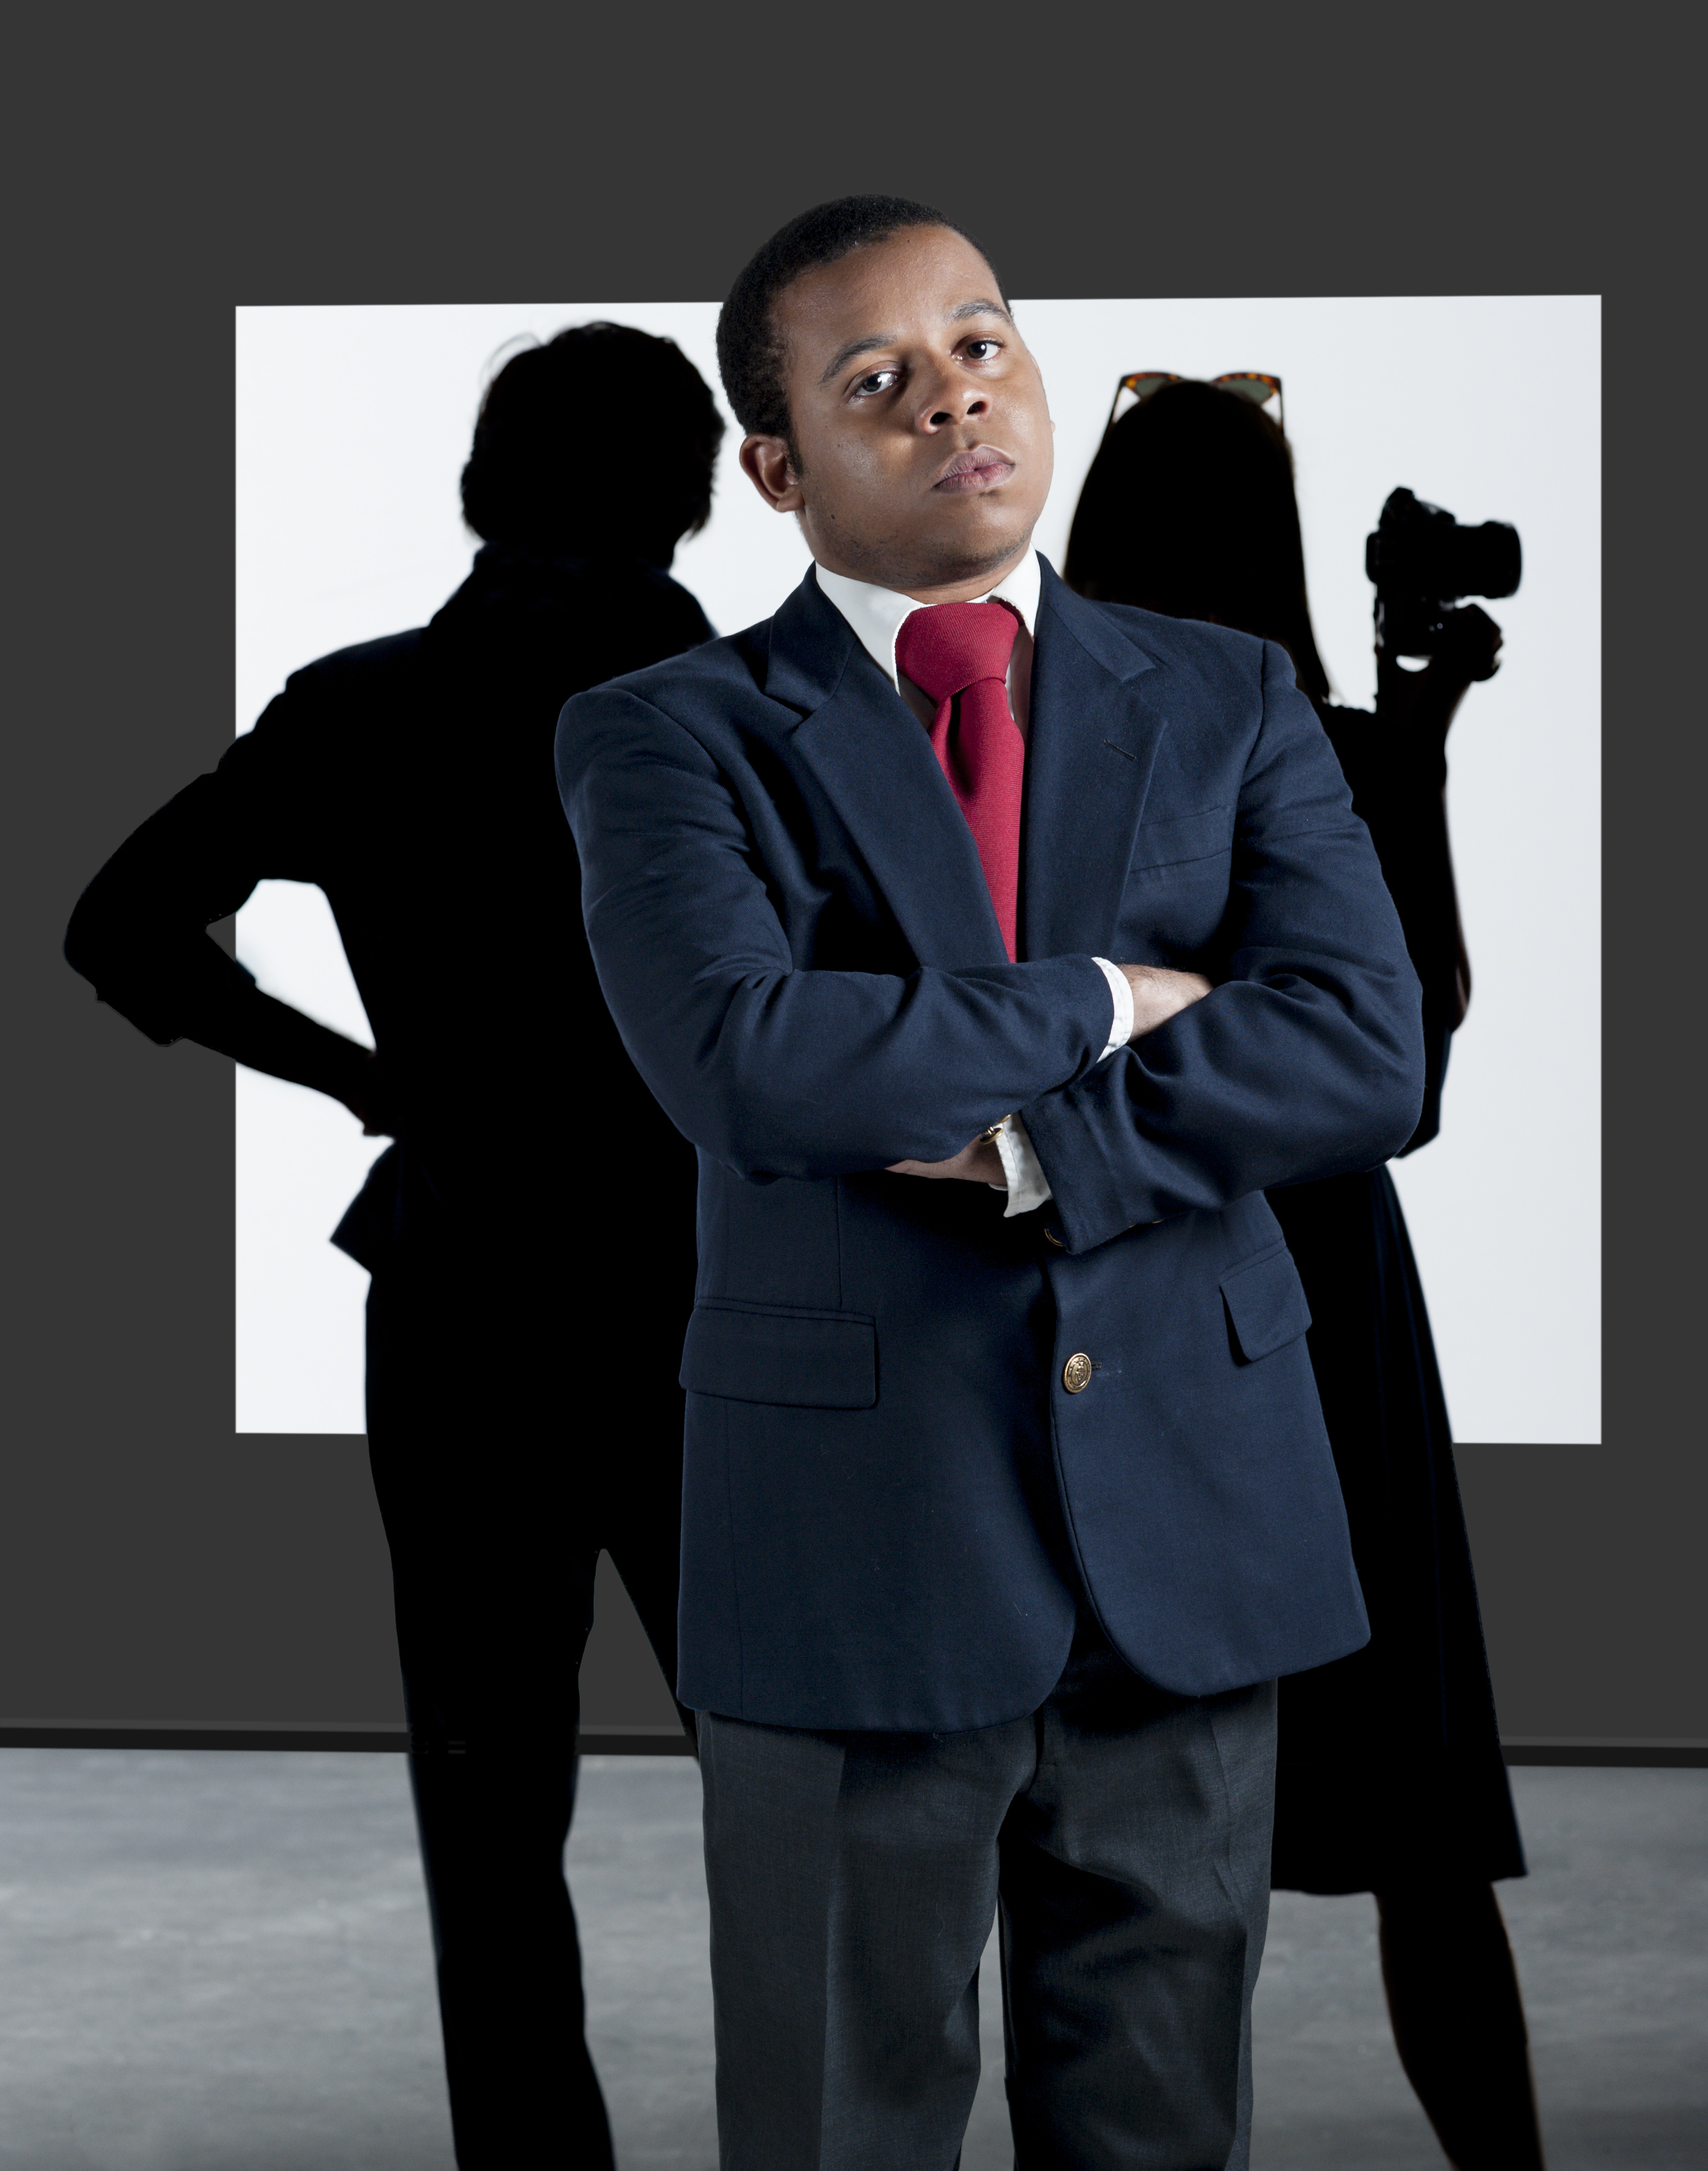 Phillip Rodgers dressed in a suit with two silhouettes behind him